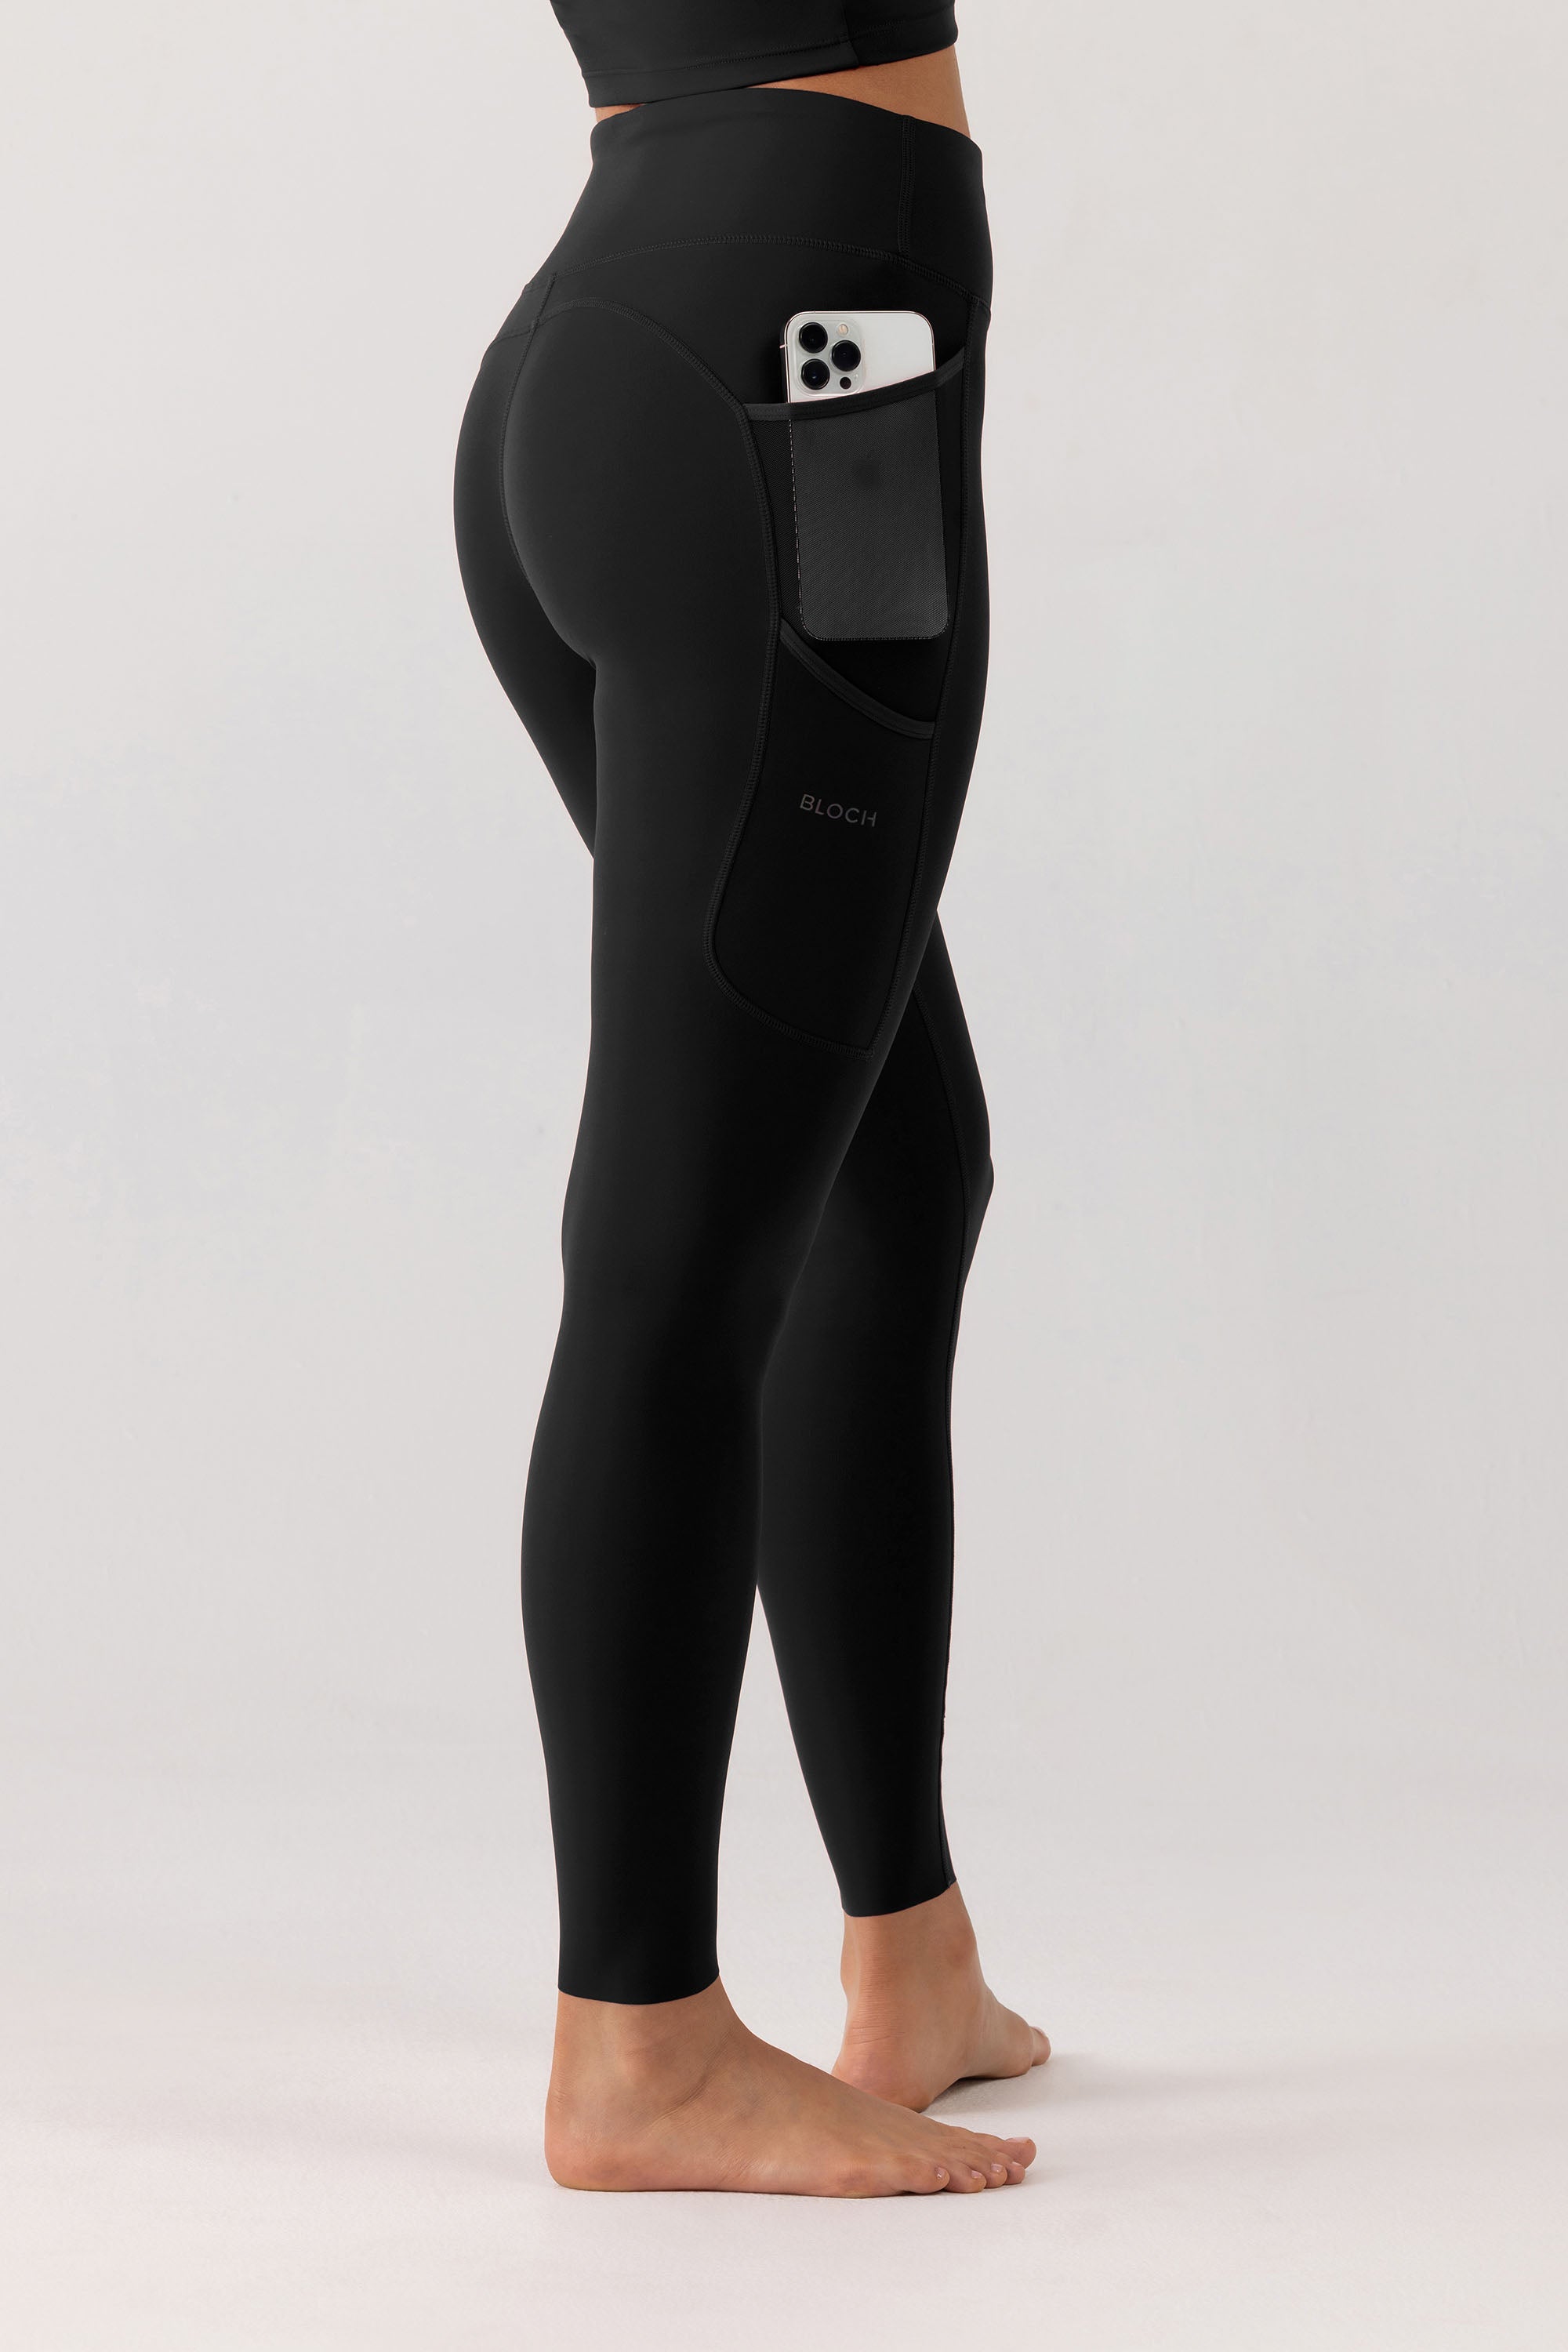 Style & Co Plus Size High Rise Leggings, Created for Macy's - Macy's